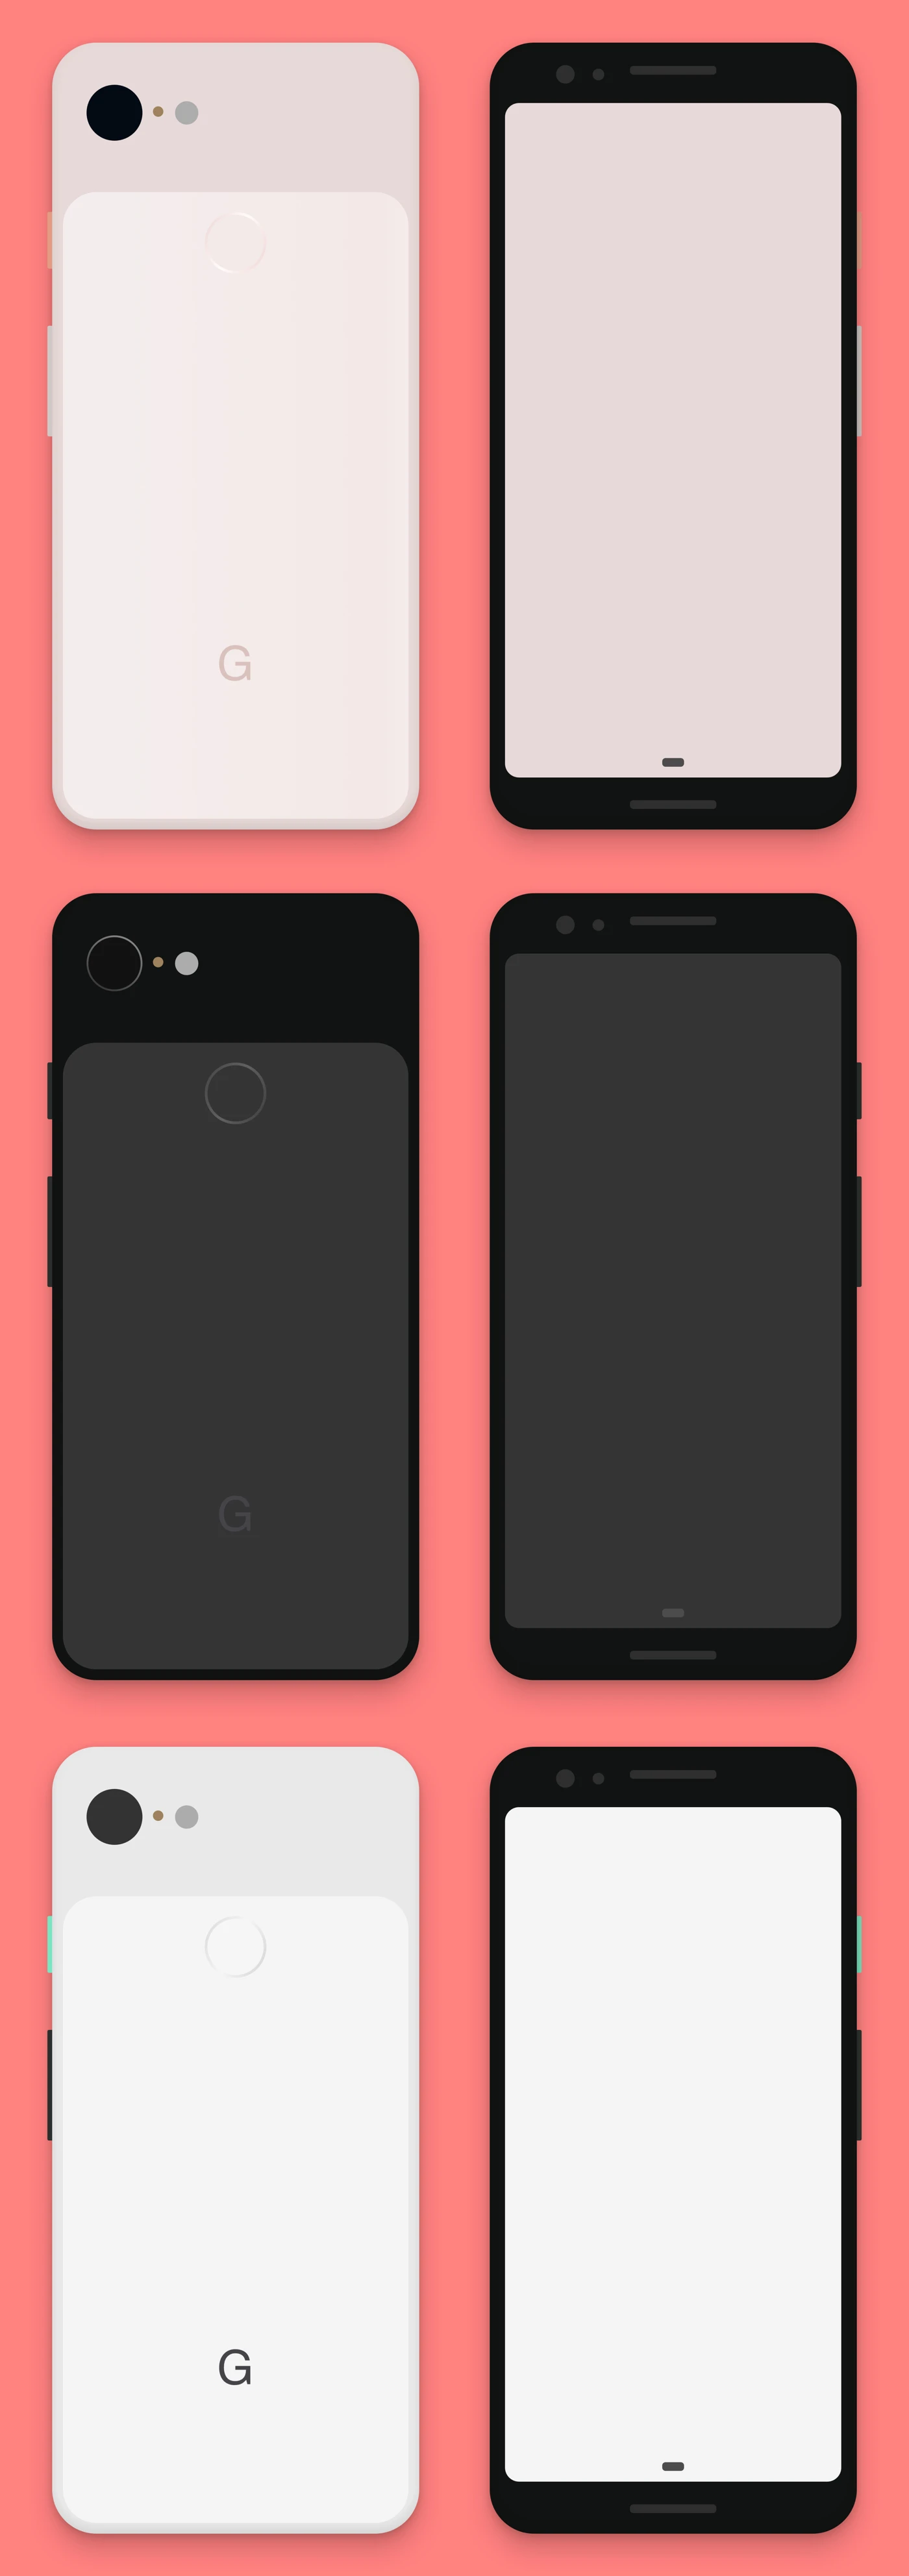 Google Pixel 3 Free Sketch Mockup - Google Pixel 3 Sketch Mockup was designed by Keri Fullwood. Easy to edit and in well organized groups.